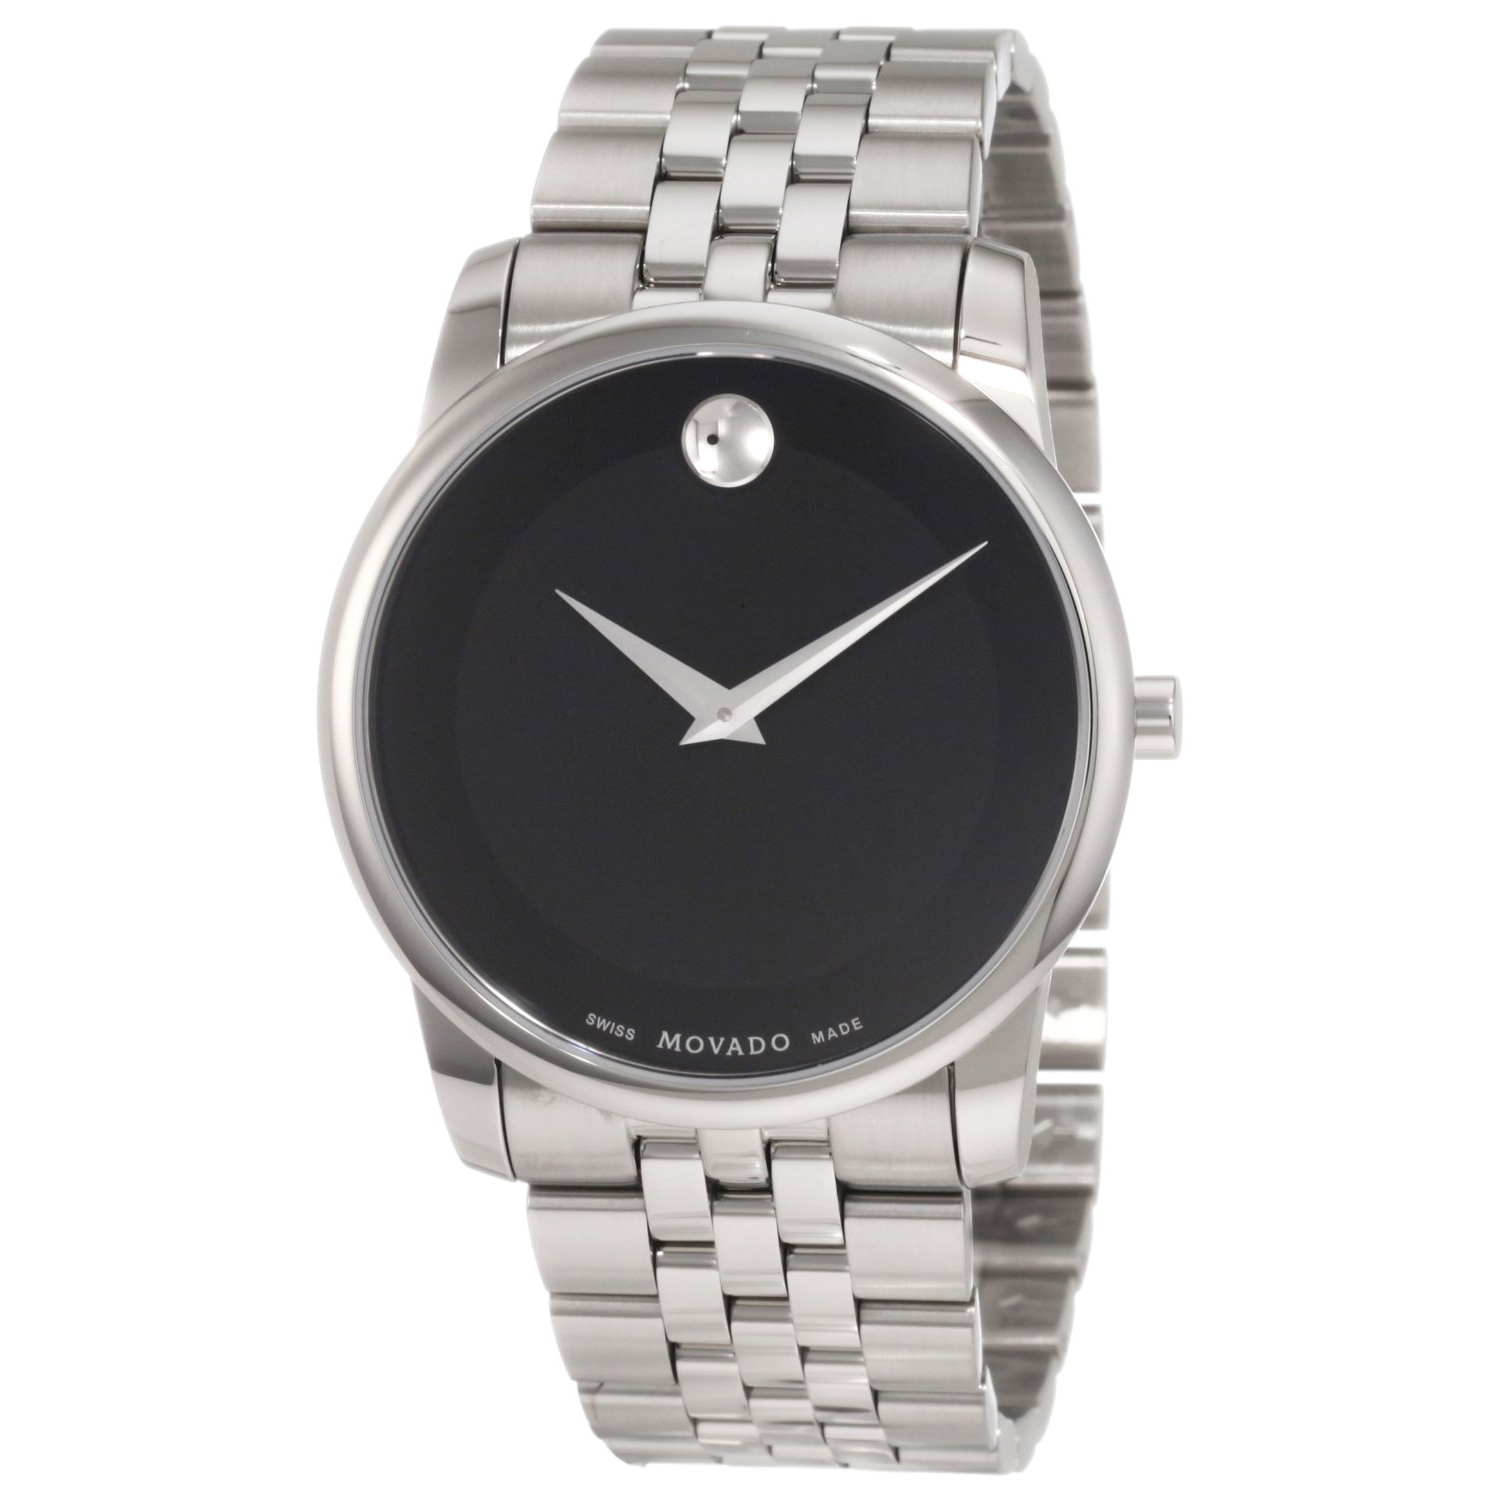 Movado Men's 0606504 Museum Stainless Steel Black Museum Dial Bracelet Watch, only $593.99, free shipping